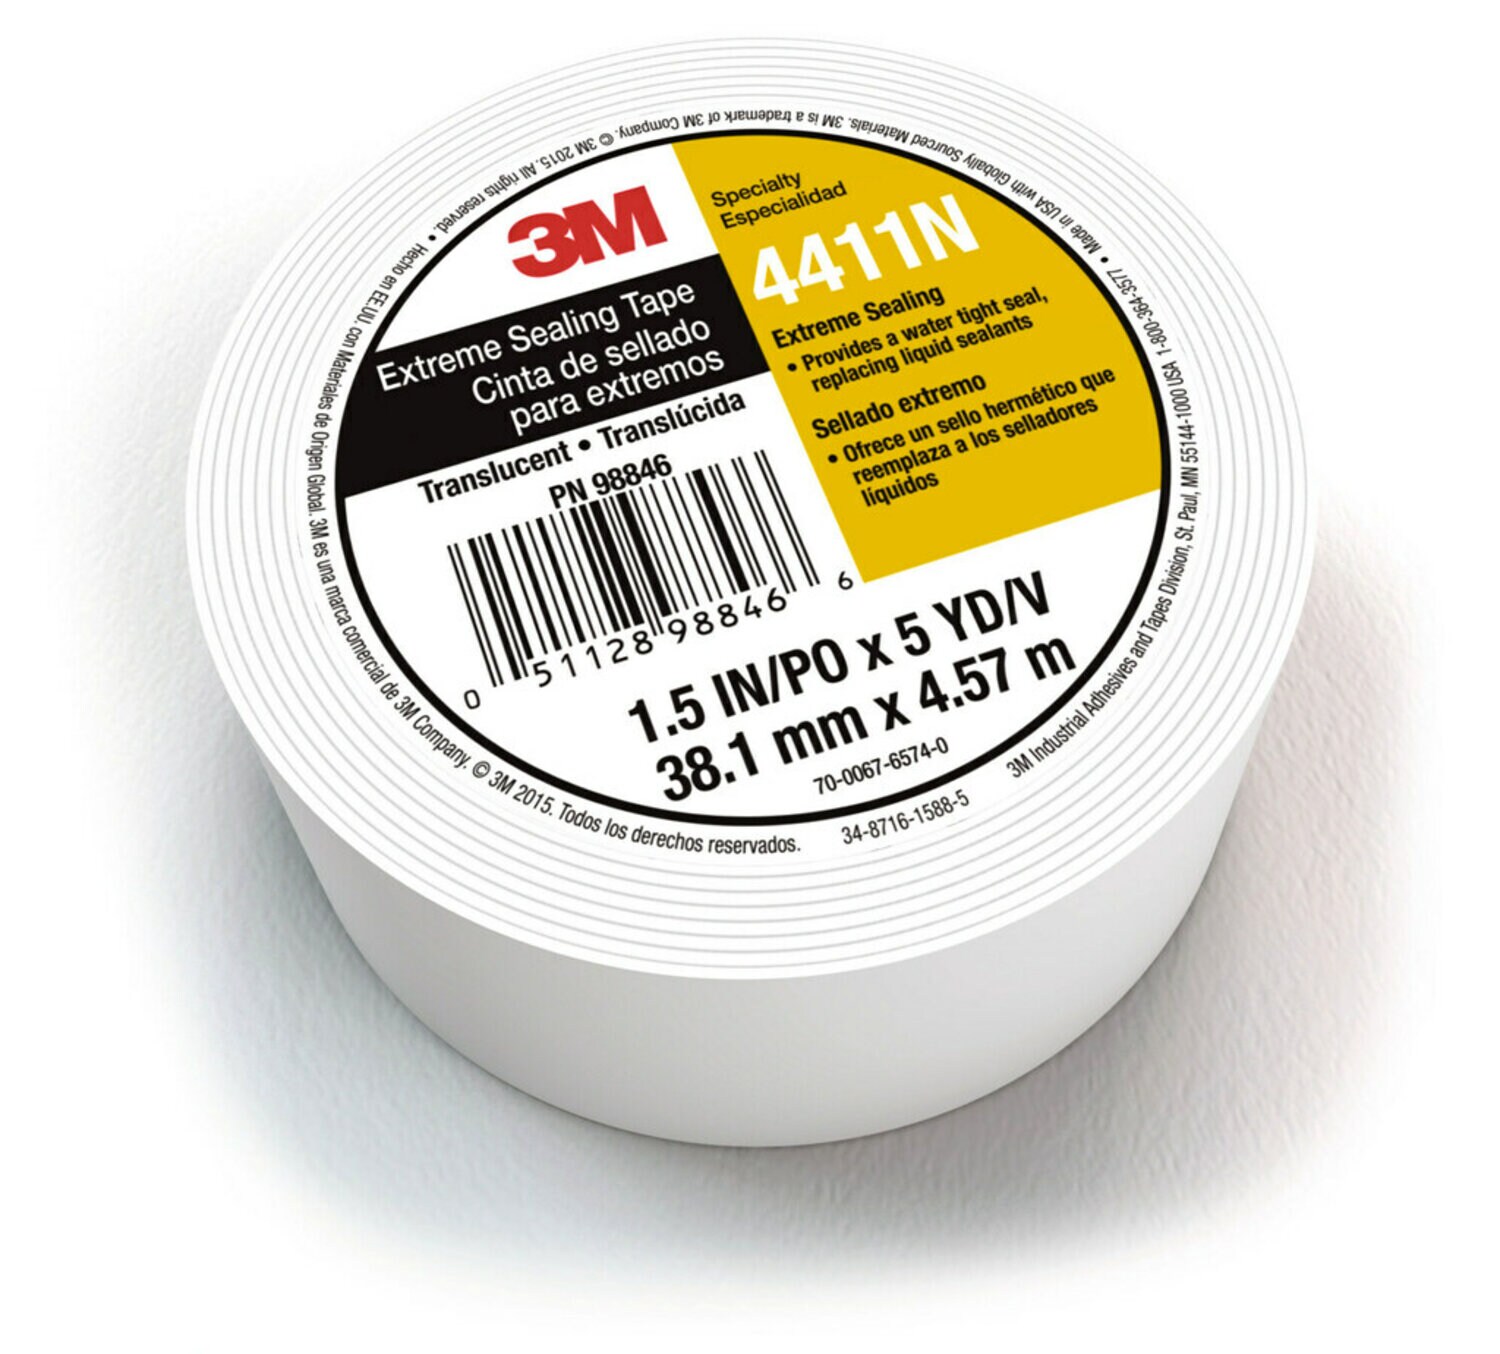 7010335938 - 3M Extreme Sealing Tape 4411N, Translucent, 3 in x 36 yards, 40 mil, 3
rolls per case